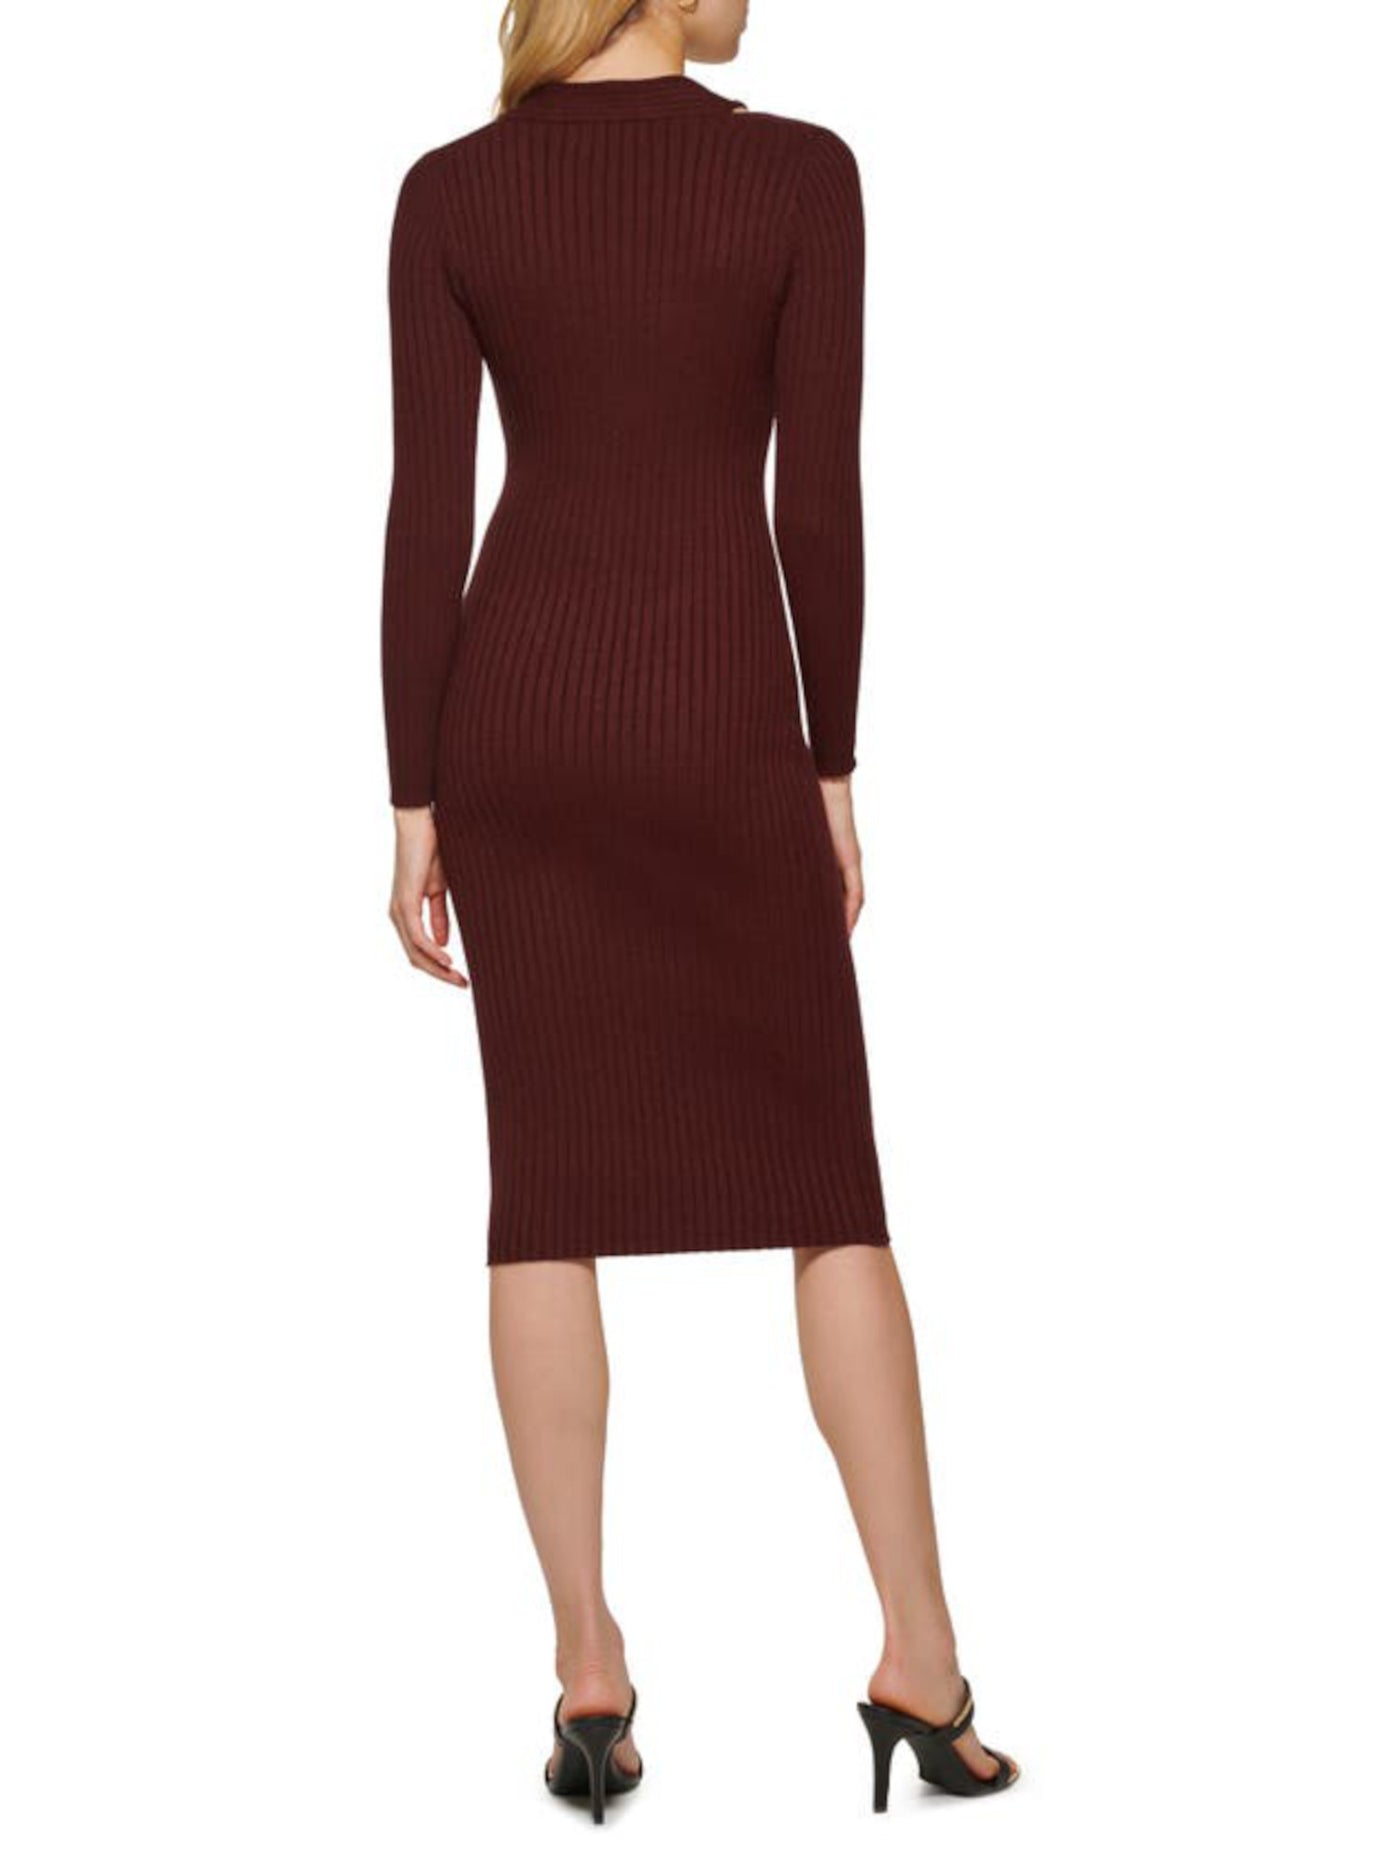 DKNY Womens Burgundy Ribbed Fitted Braided Neckline Pullover Long Sleeve V Neck Below The Knee Evening Sweater Dress XL